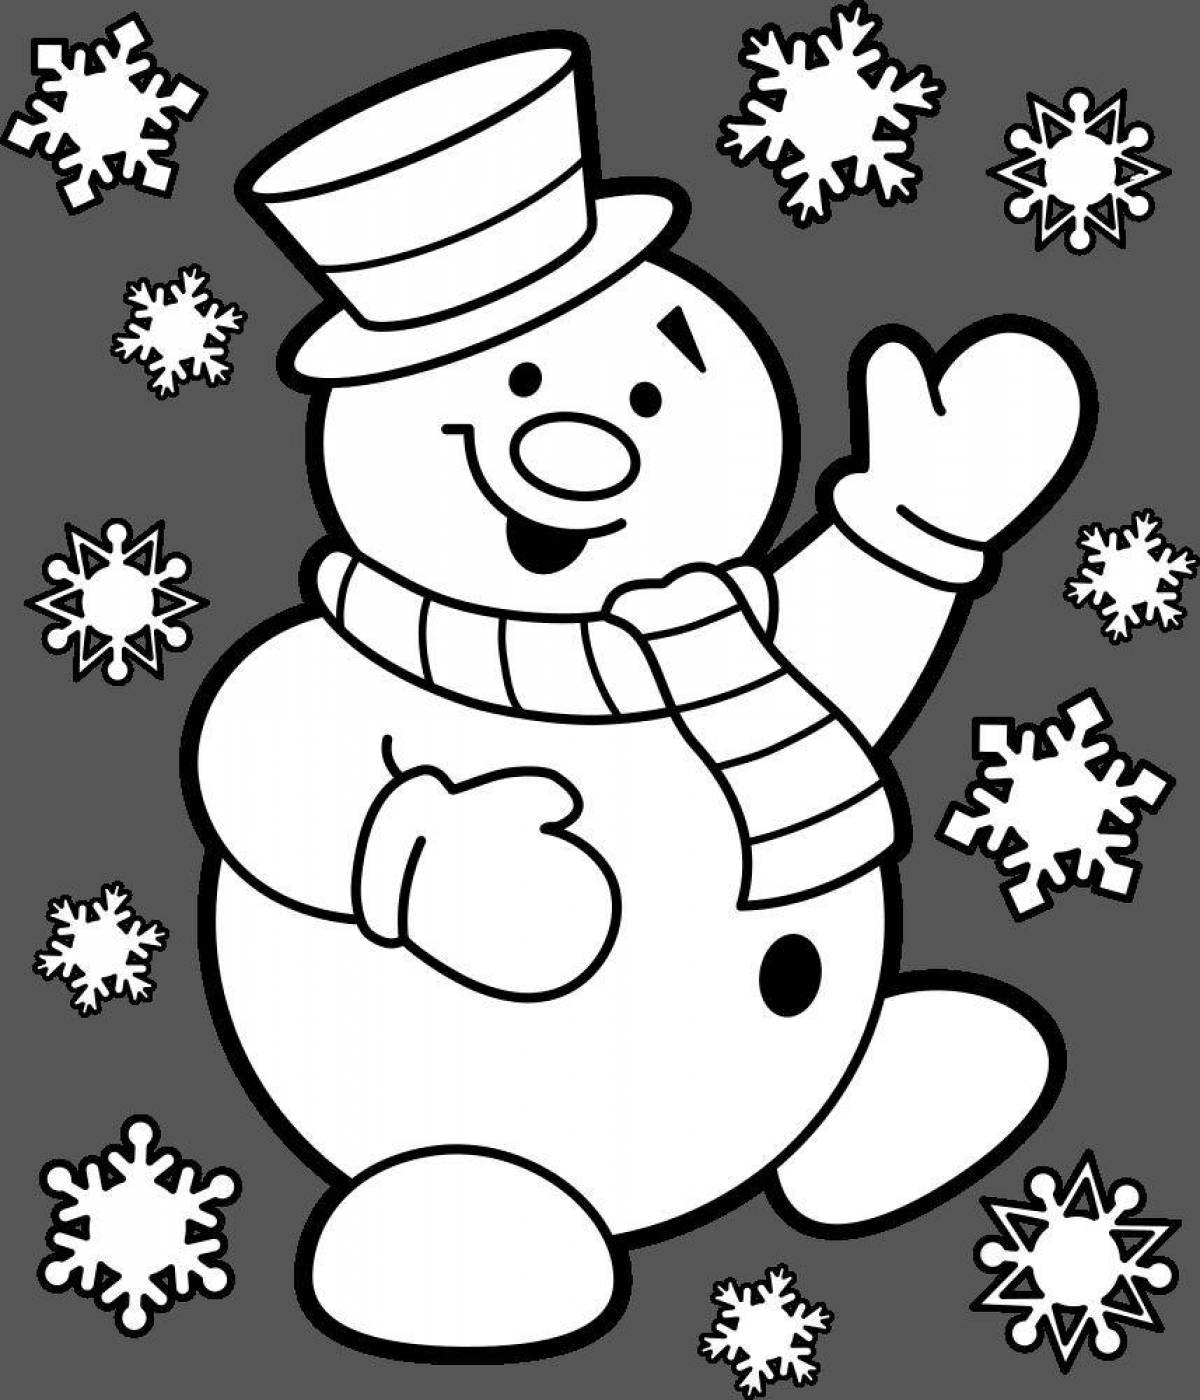 Glowing Christmas snowman coloring page